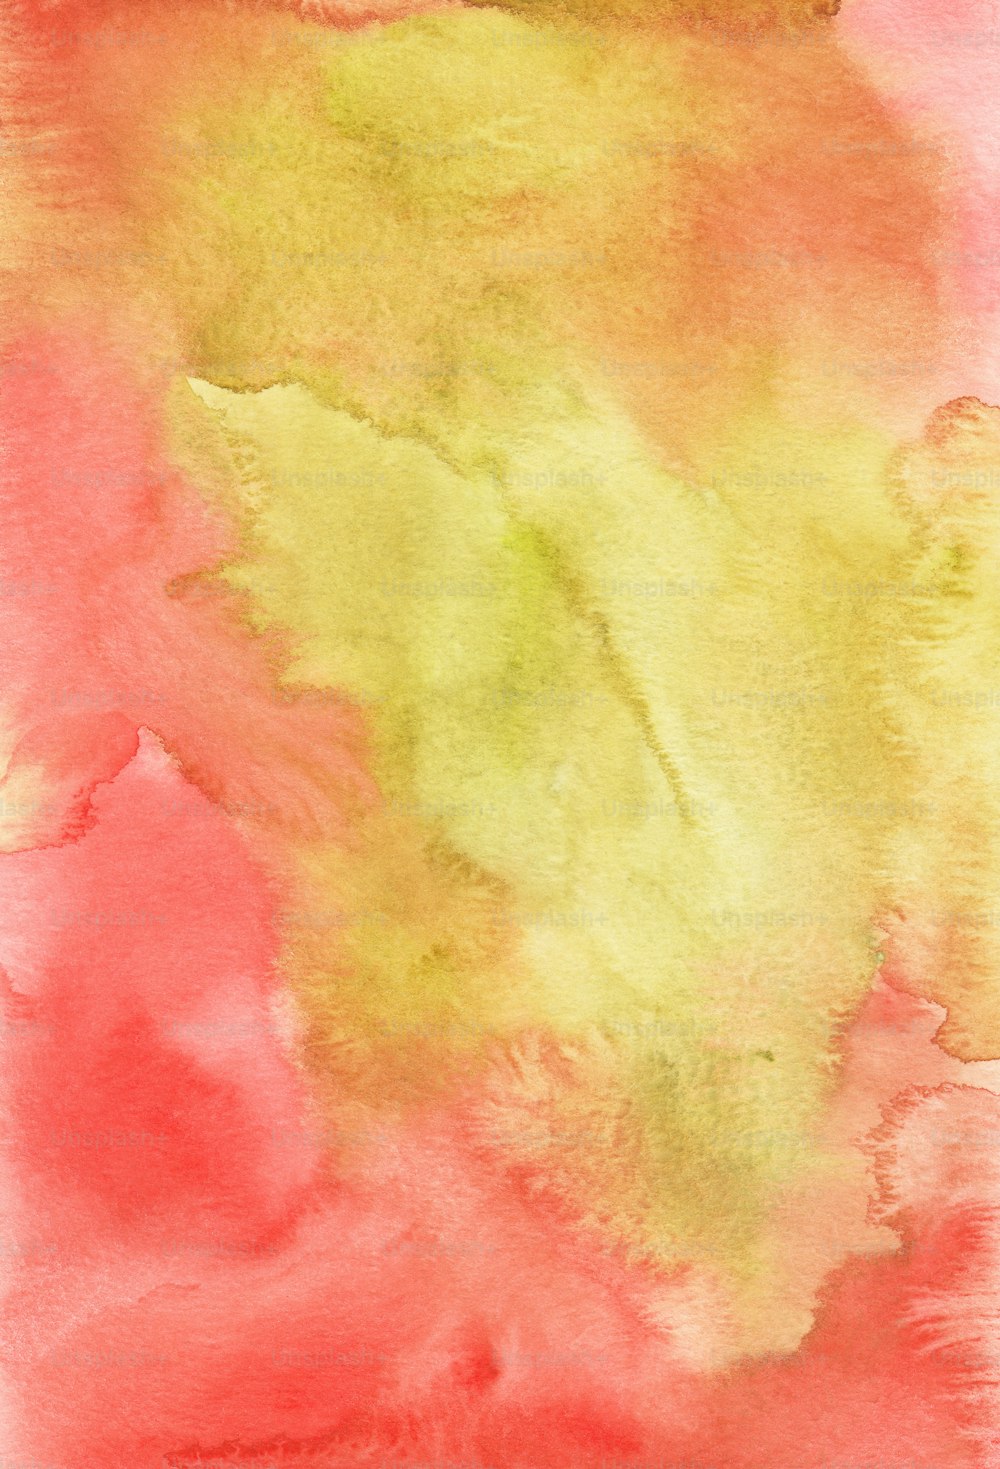 a watercolor painting of a pink and yellow background